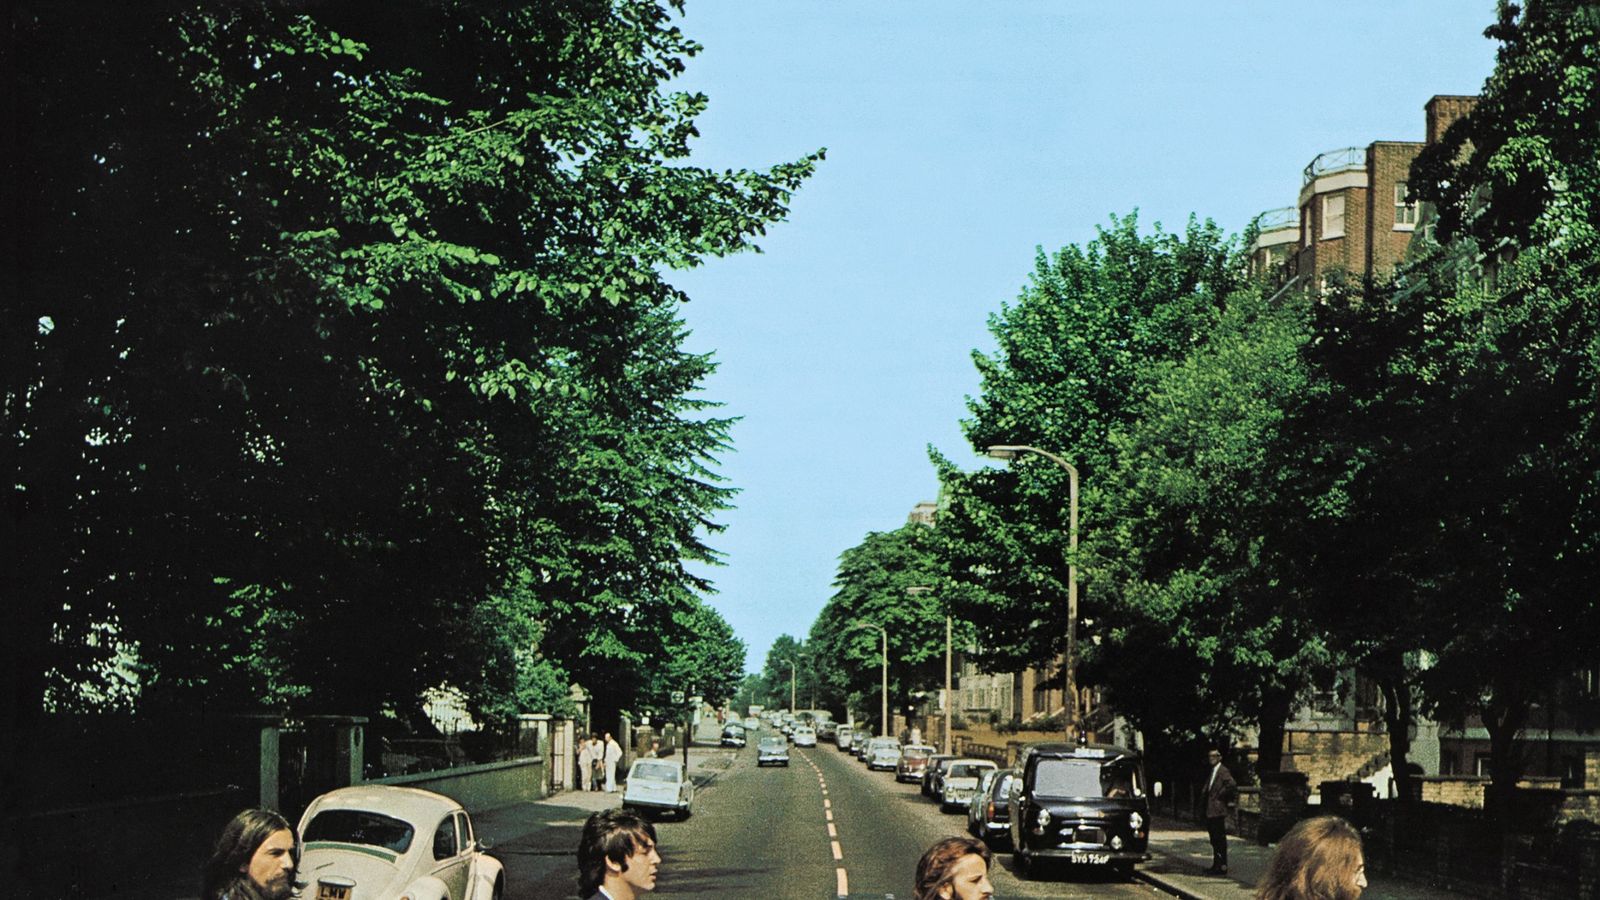 Abbey Road: The story behind the famous cover, Ents & Arts News